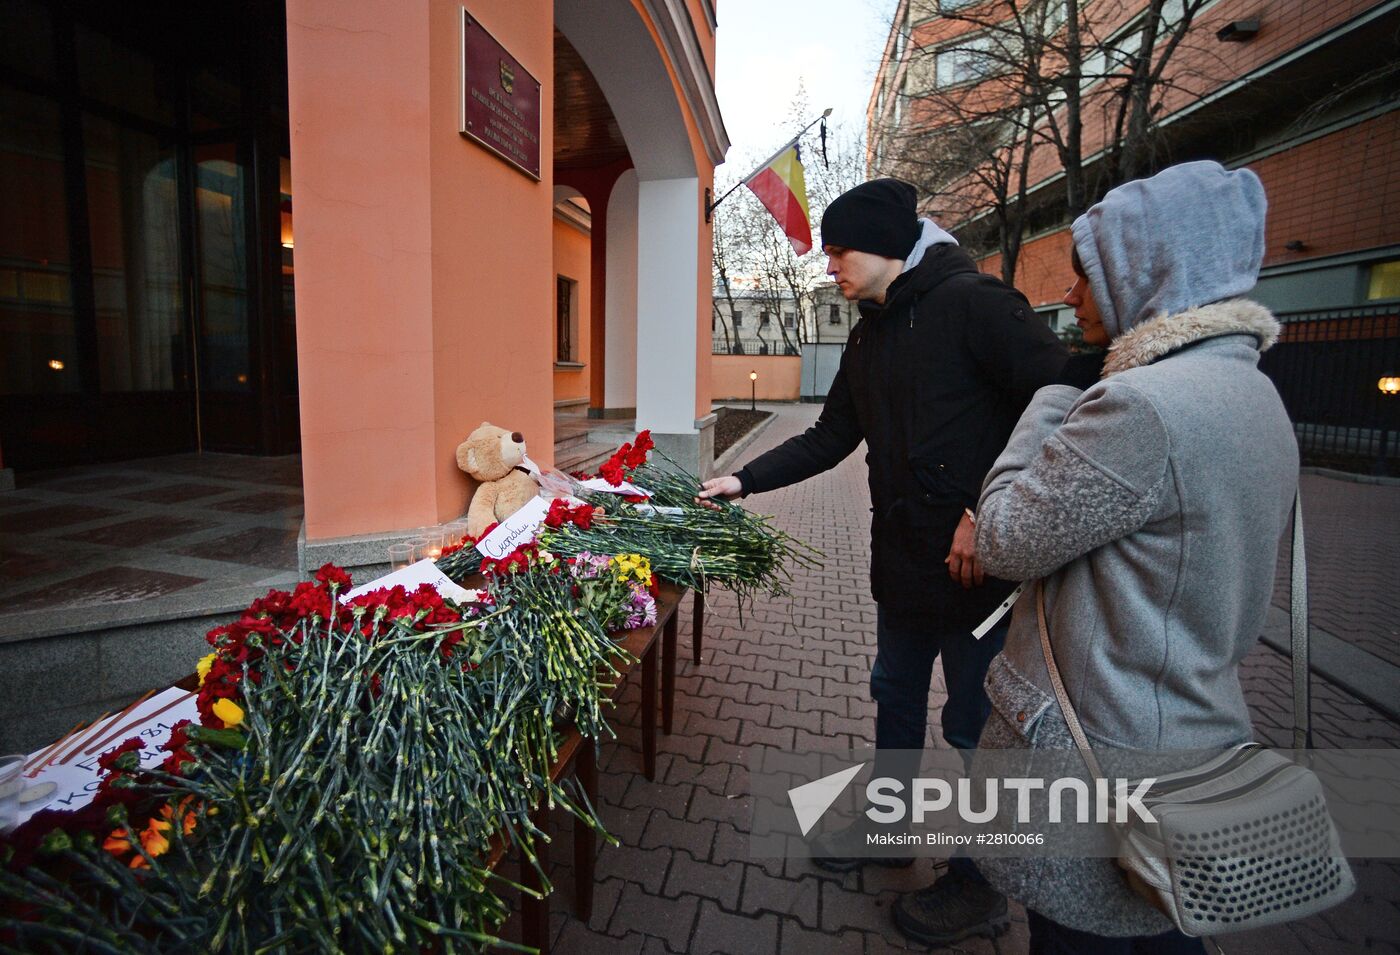 Paying tribute to the Boeing 737 crash victims at the Rostov-on-Don Region representative office in Moscow